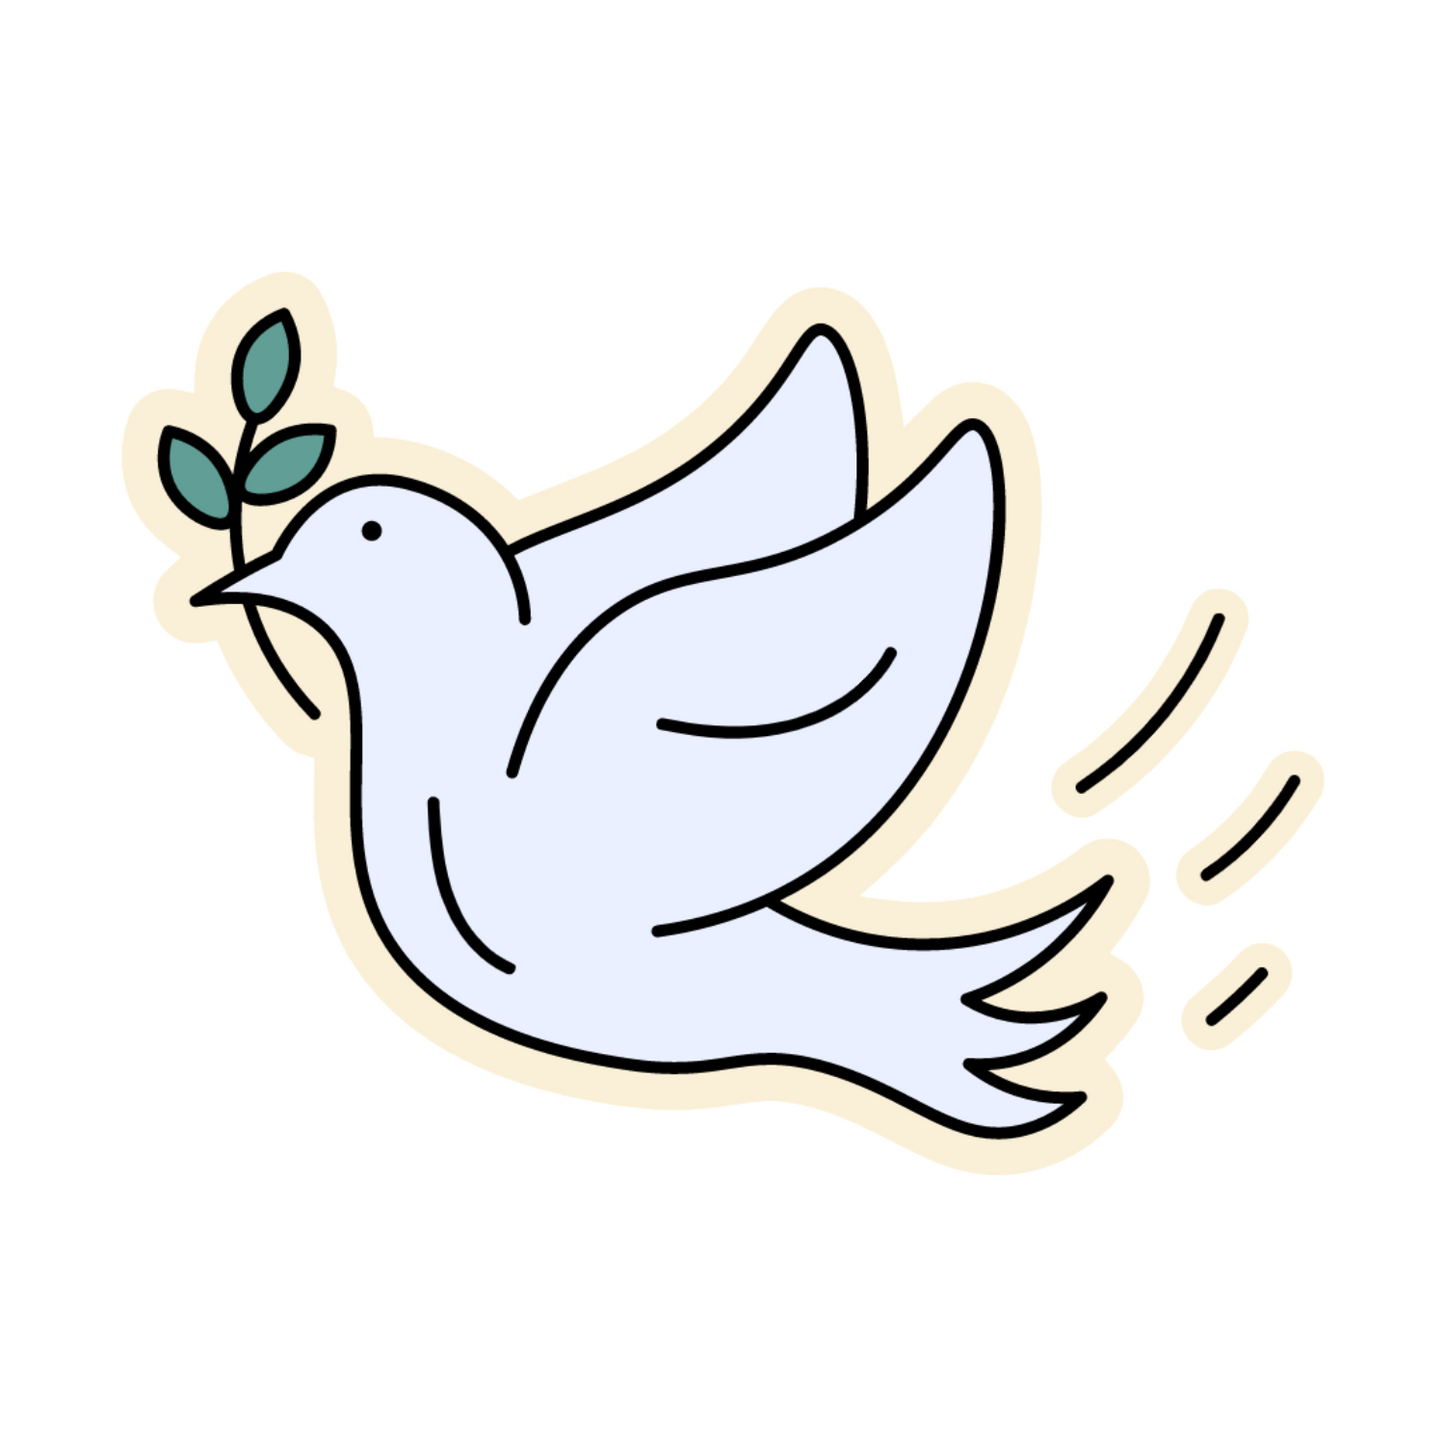 Inspirational Quote "Peace Dove" Motivational Sticker Vinyl Decal Motivation Stickers- 5" Vinyl Sticker Waterproof